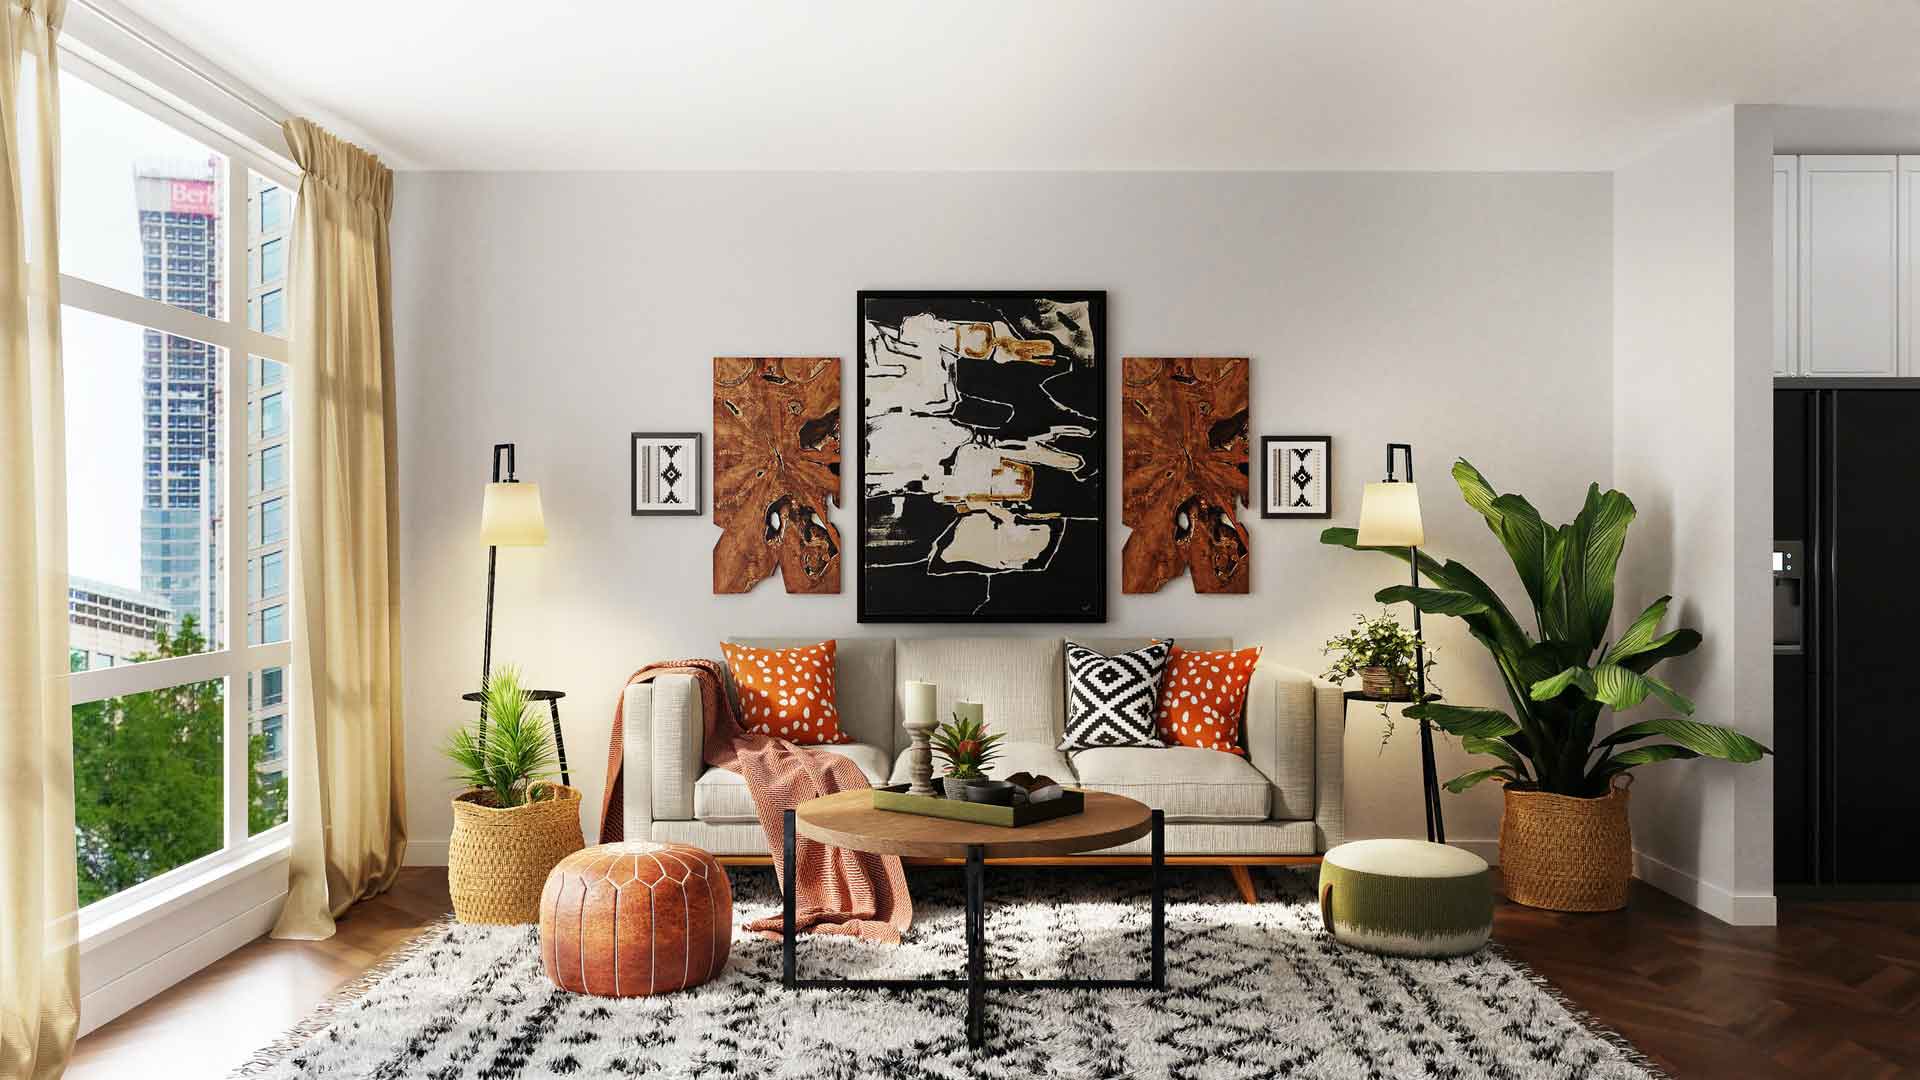 10 Places to Find Cheap Home Decor and Accessories